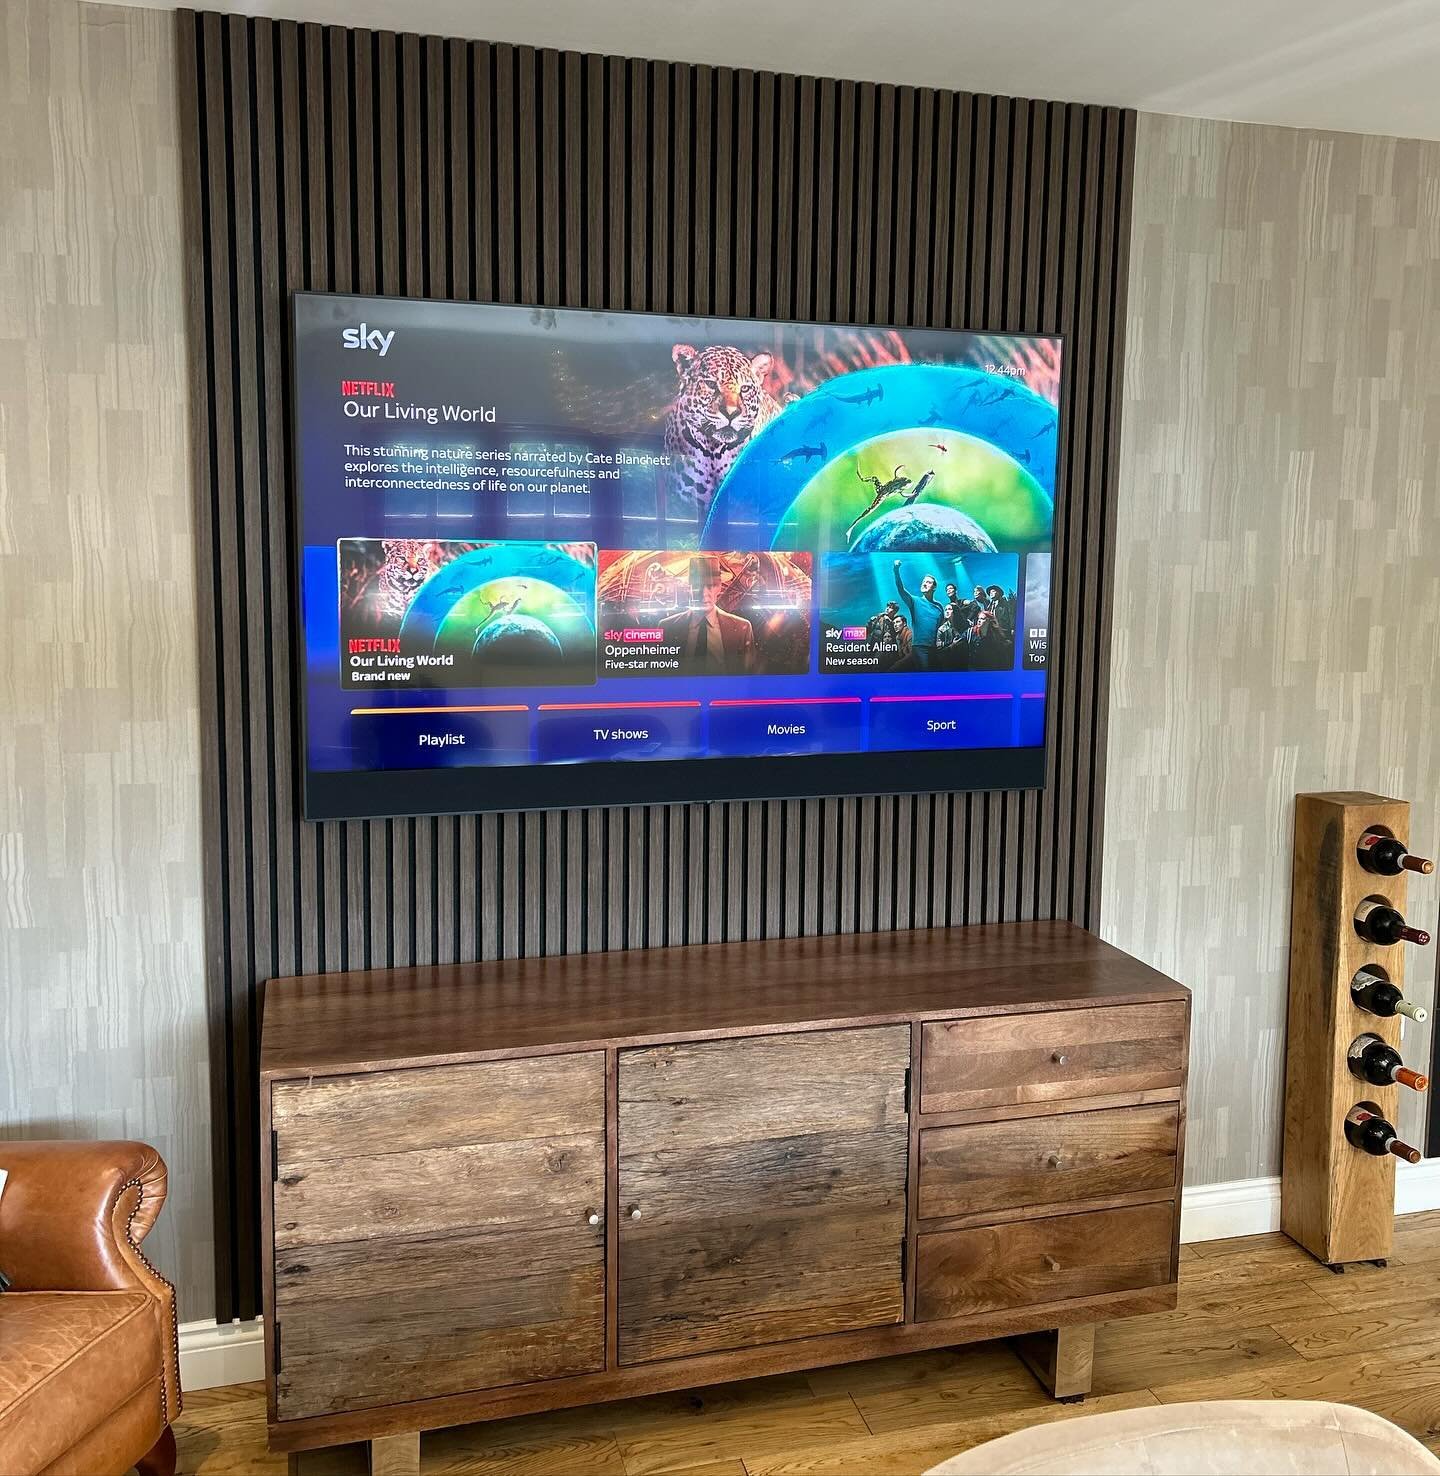 Feature Wall installation completed in Leire today.

If you are looking for a bespoke Feature Wall give us a call for a FREE quote.

Check us out at www.ultravision.info
Or call Pete on 07904 487 426

#mediawall #tvmediawall #tvwallmount #tvwallmount